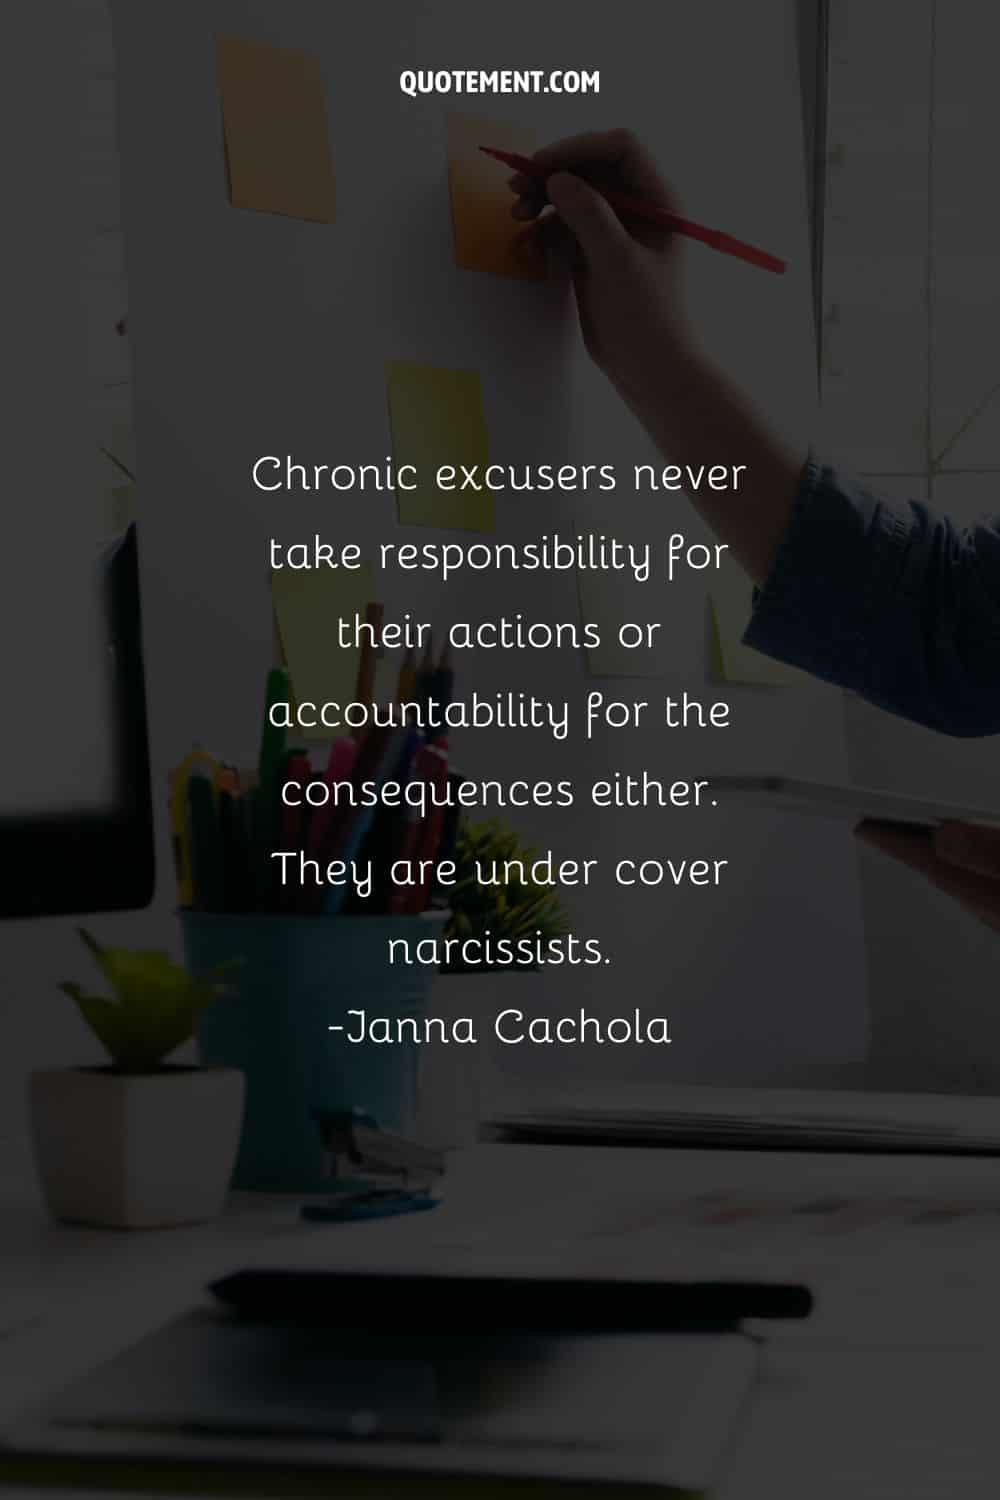 Chronic excusers never take responsibility for their actions or accountability for the consequences either